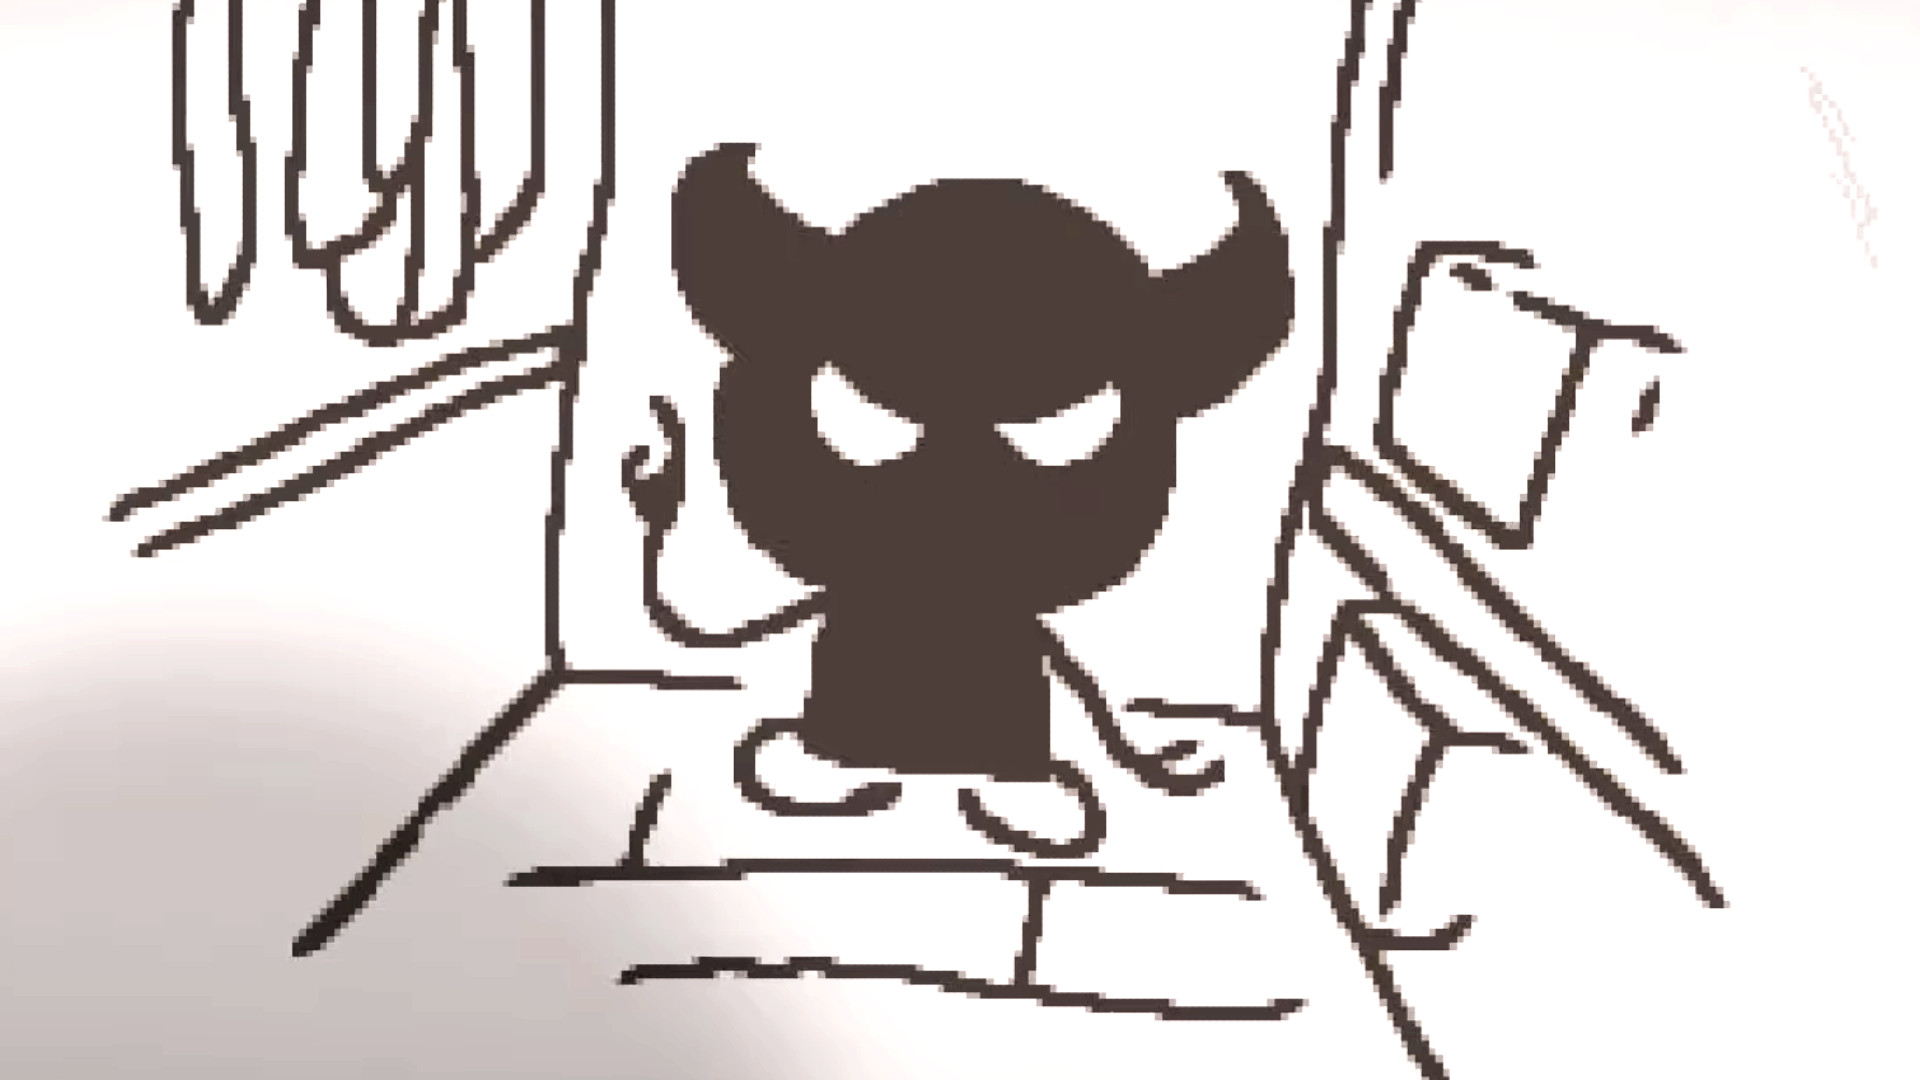 The Binding of Isaac Rebirth - A shadowy, horned figure stands in a small room.